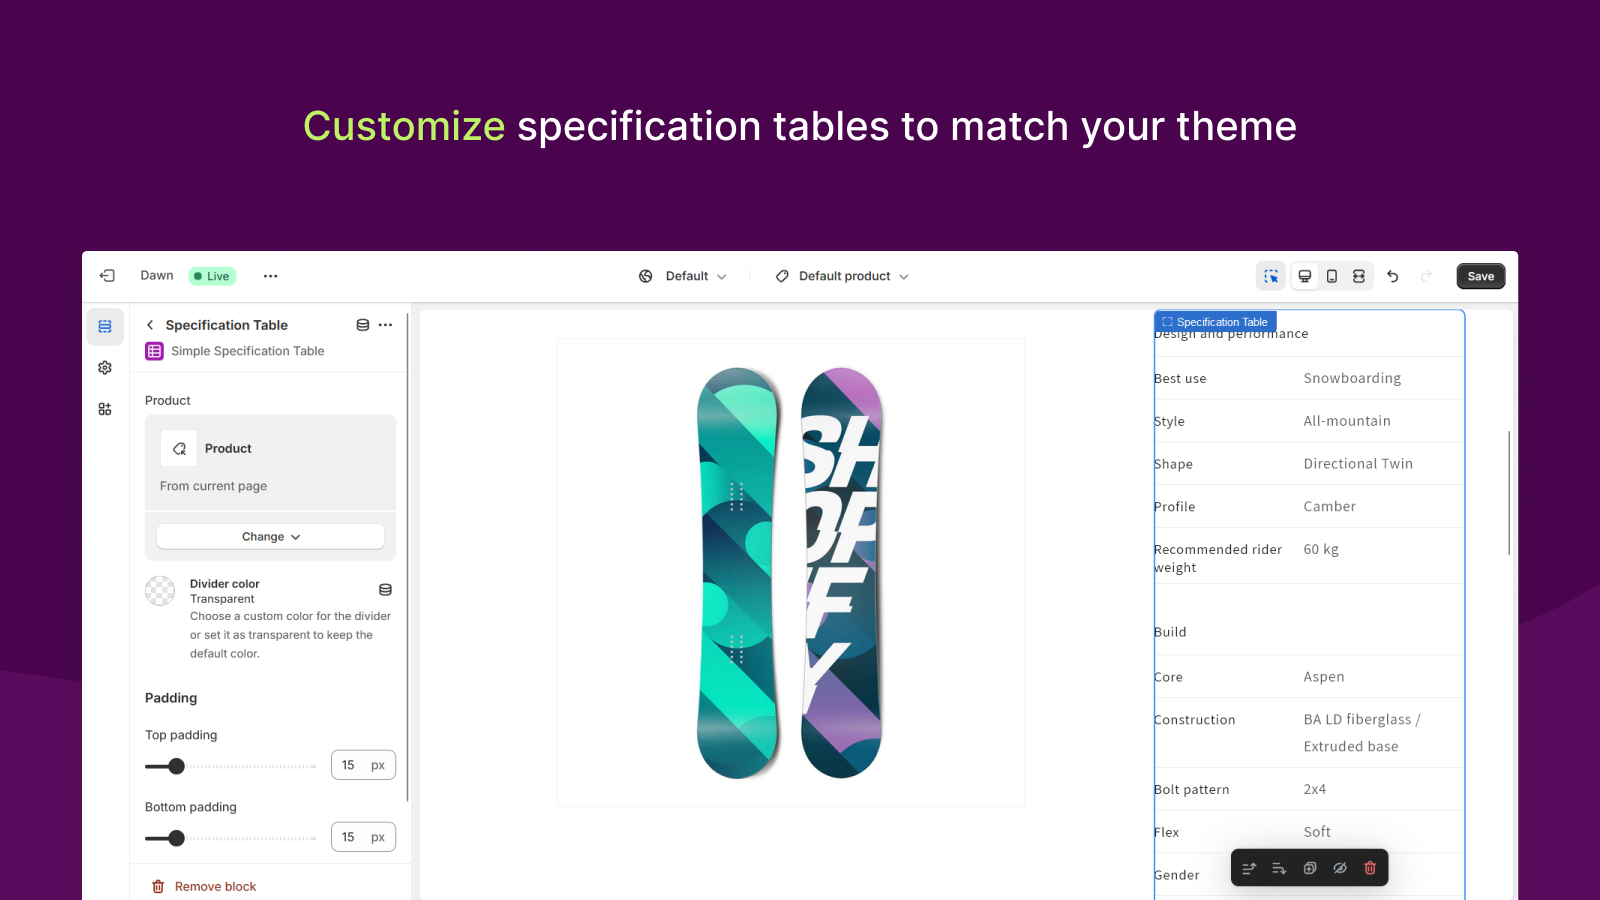 Customize specification tables to match your theme